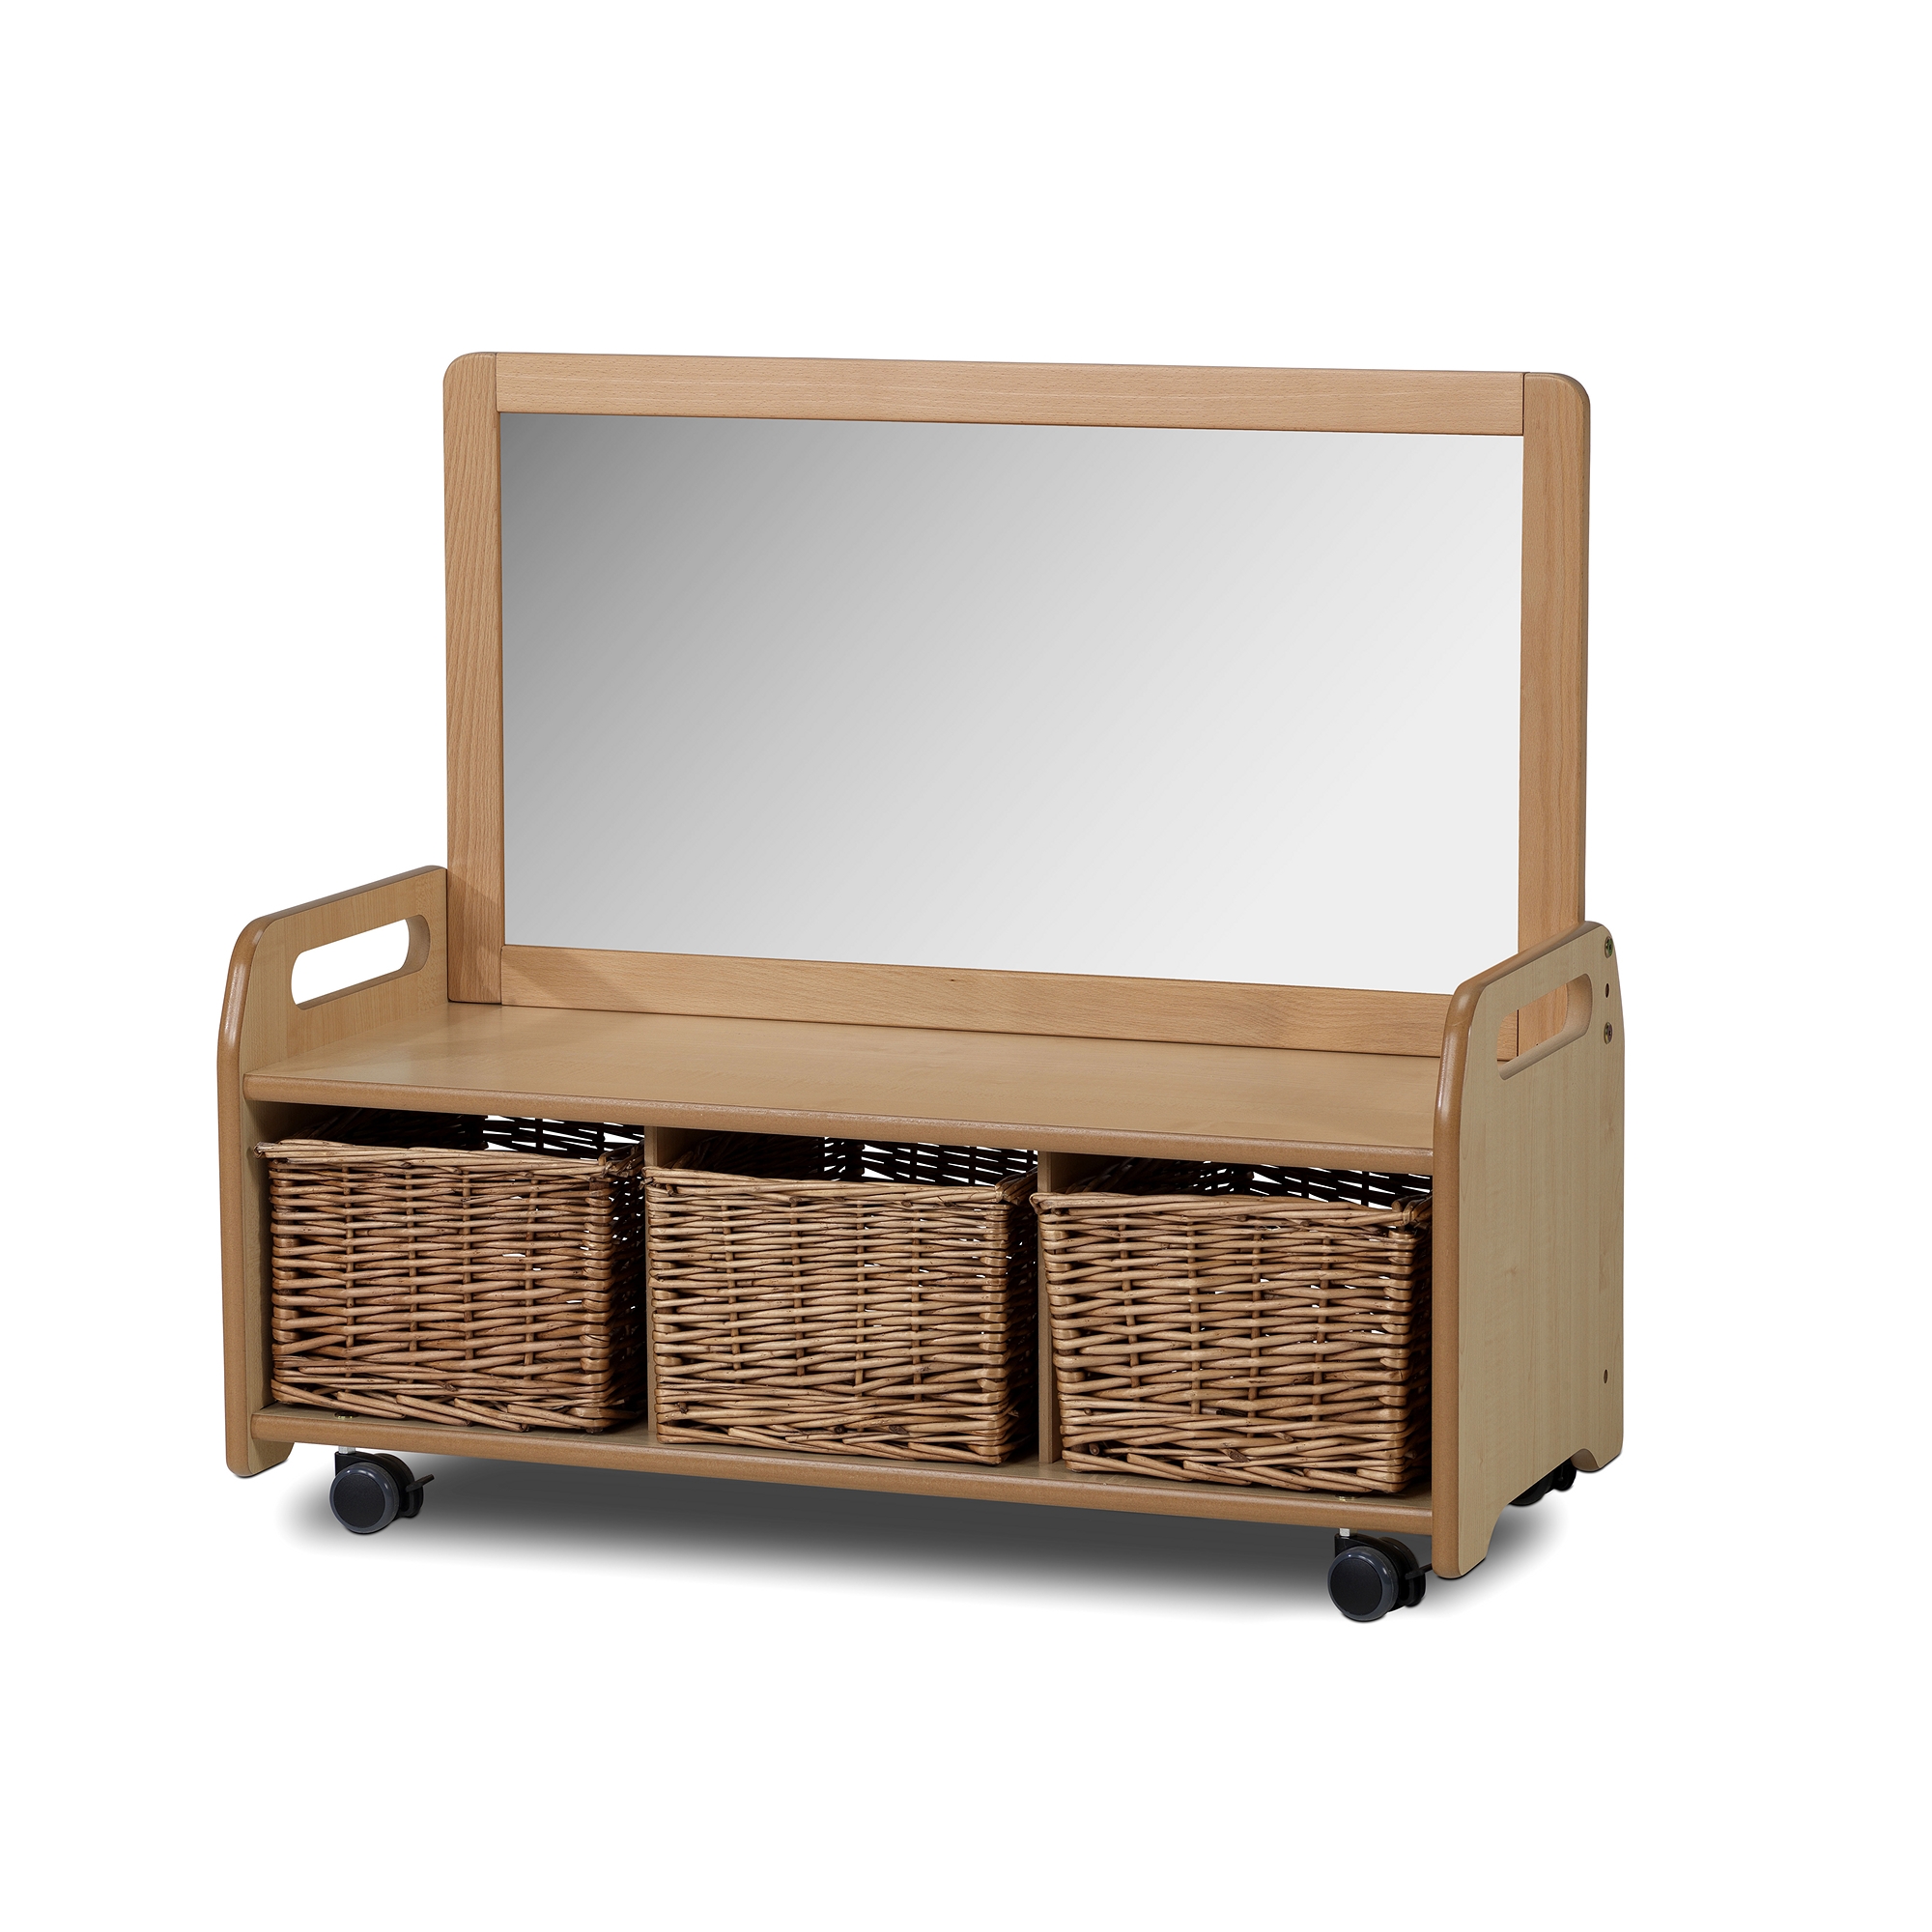 Playscapes Mobile Mirror Unit - Wicker Baskets